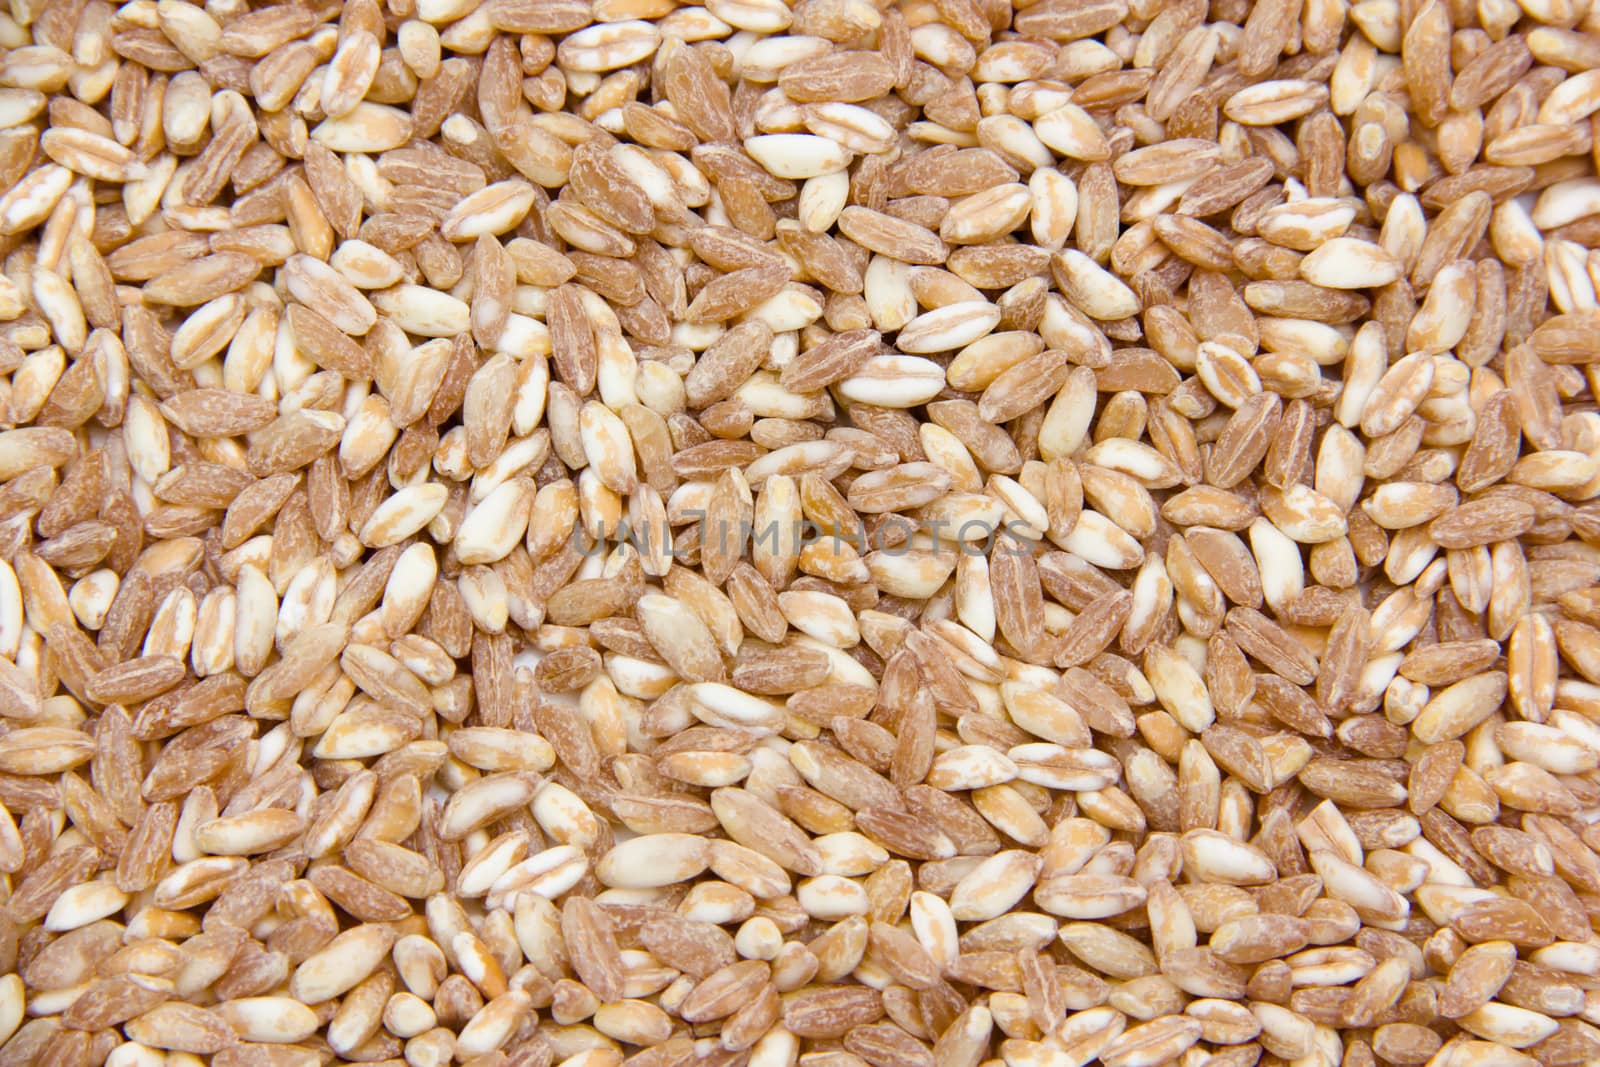 Wheat viewed from up close and personal